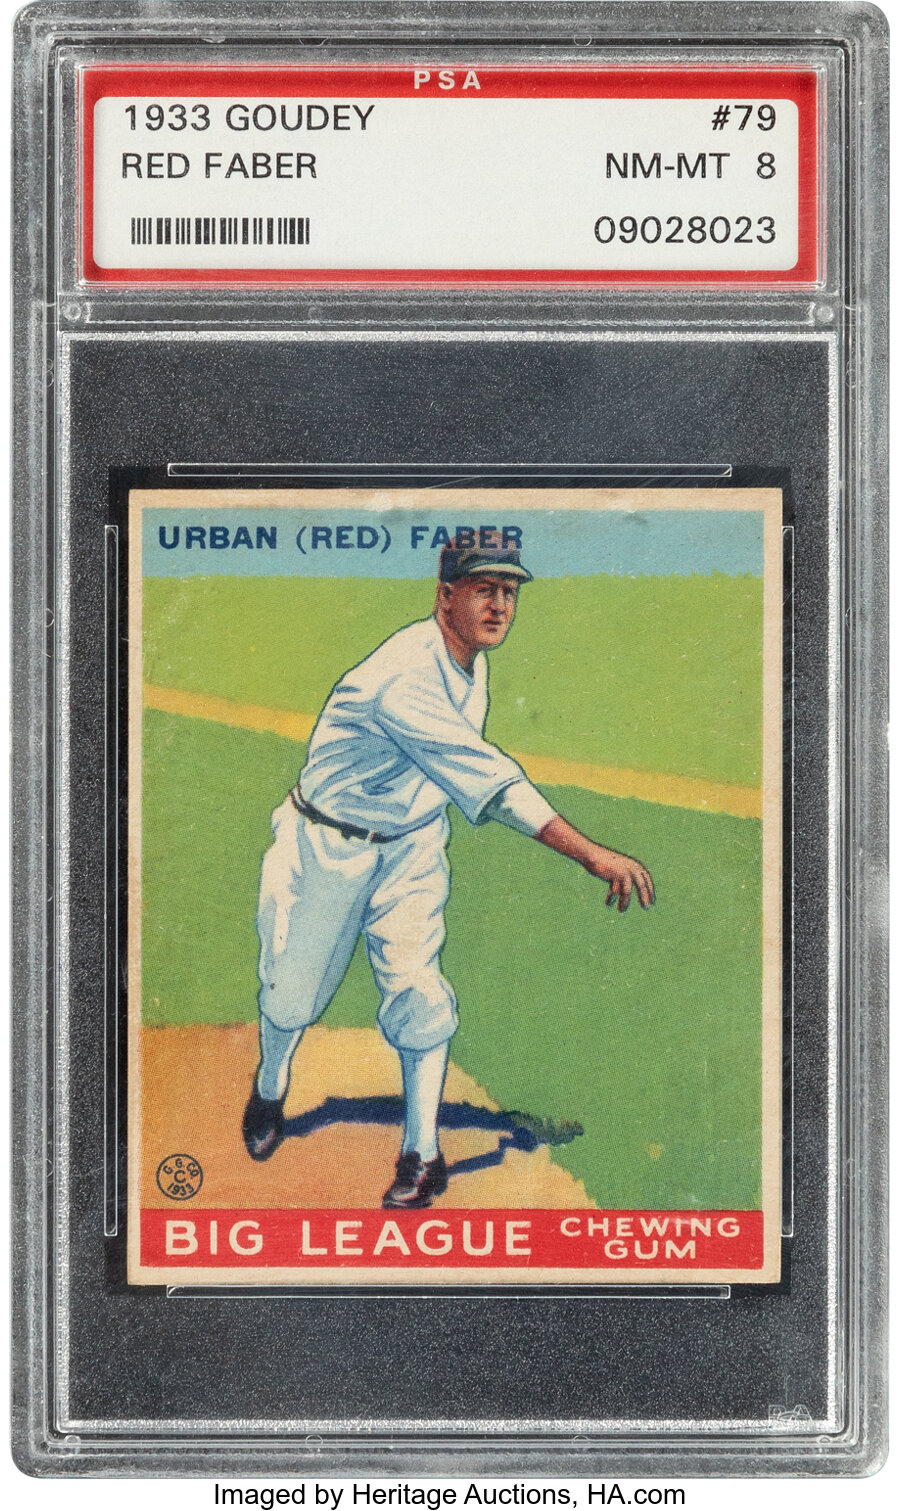 1933 Goudey Red Faber #79 PSA NM-MT 8